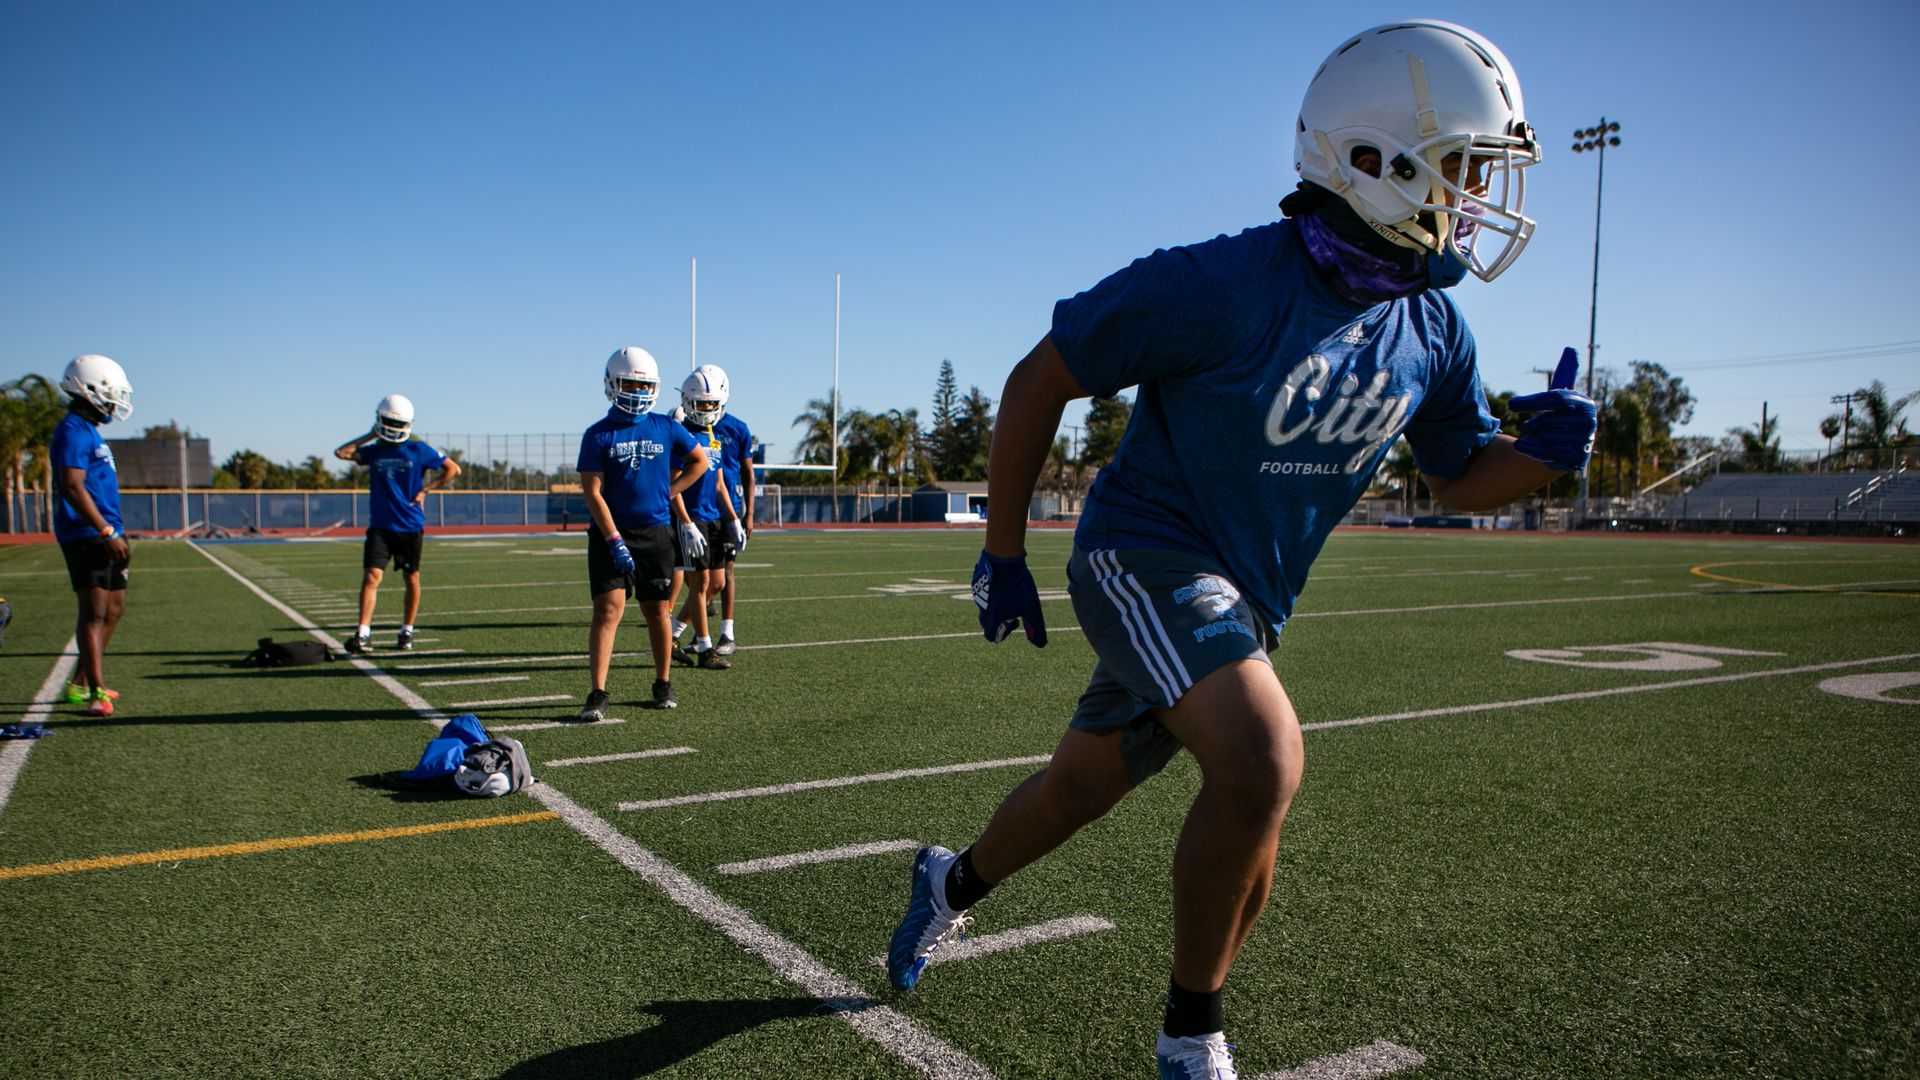 Wide Receivers at Culver City High School in California practicing routes on Feb. 26.